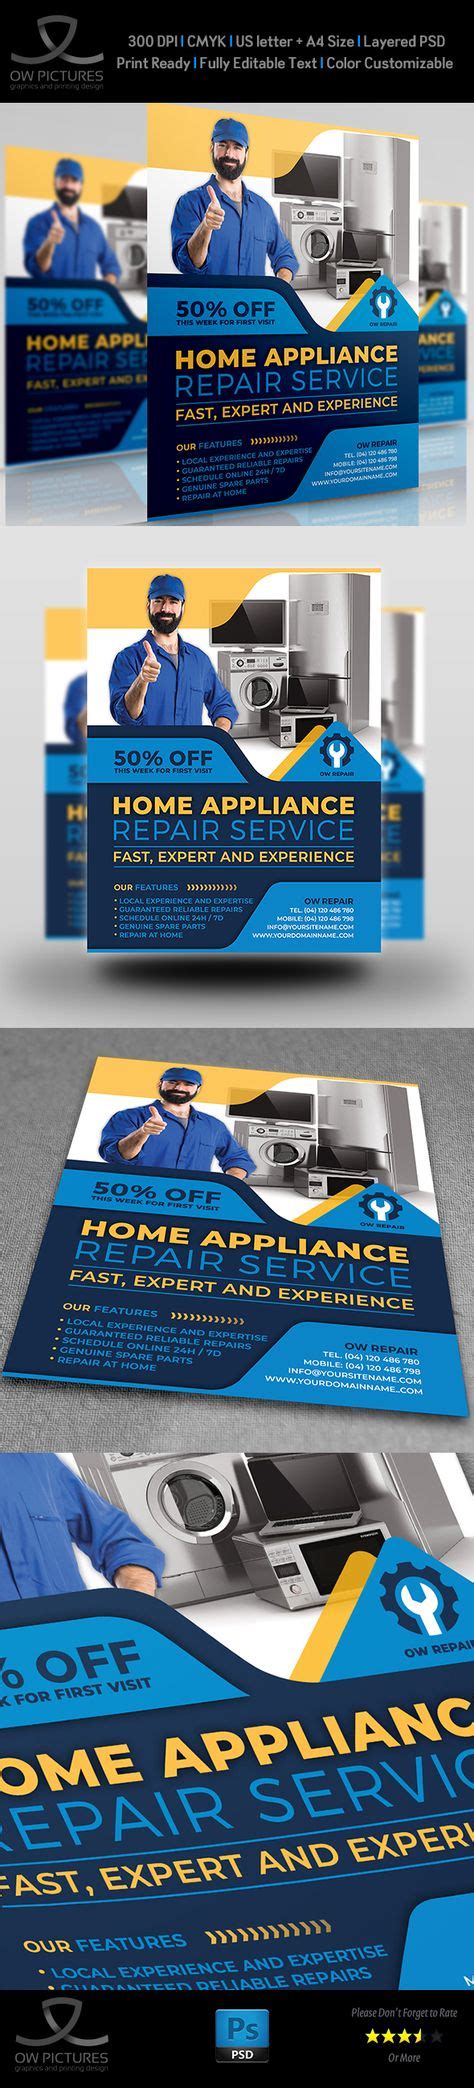 Home Appliance Repair Service Flyer Template Was Designed For